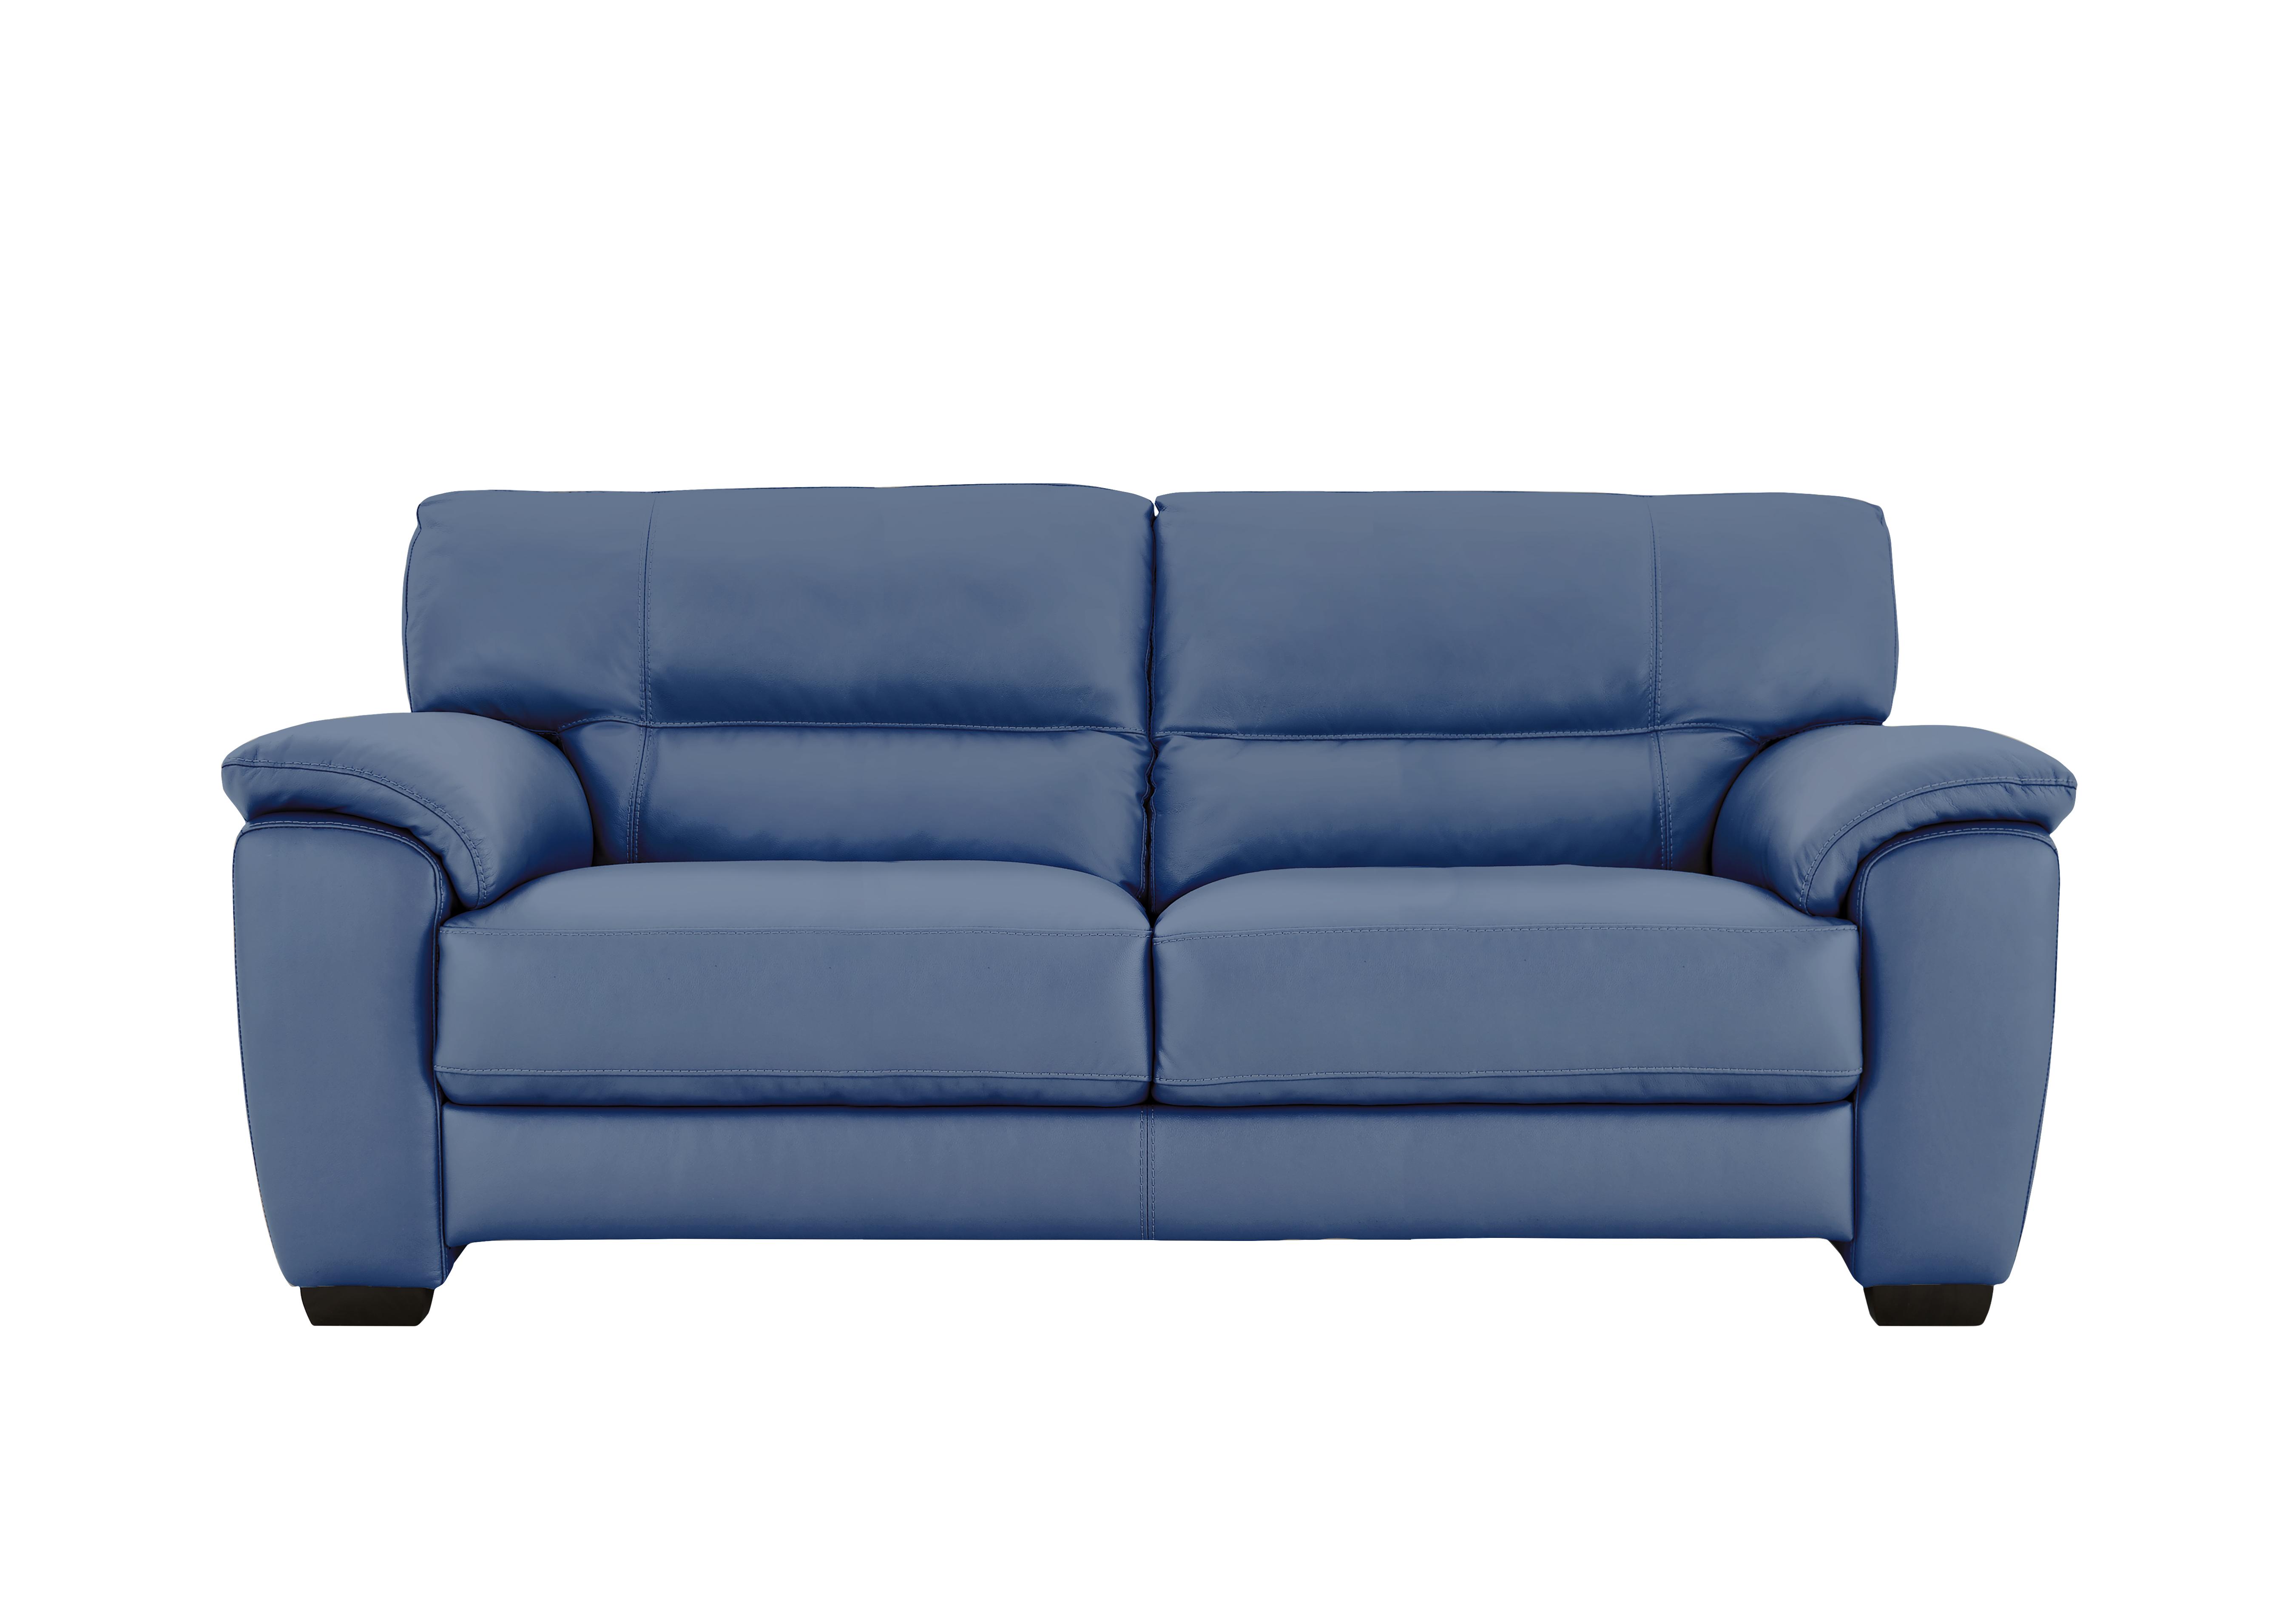 Blue Sofas at Exceptional Prices - Furniture Village